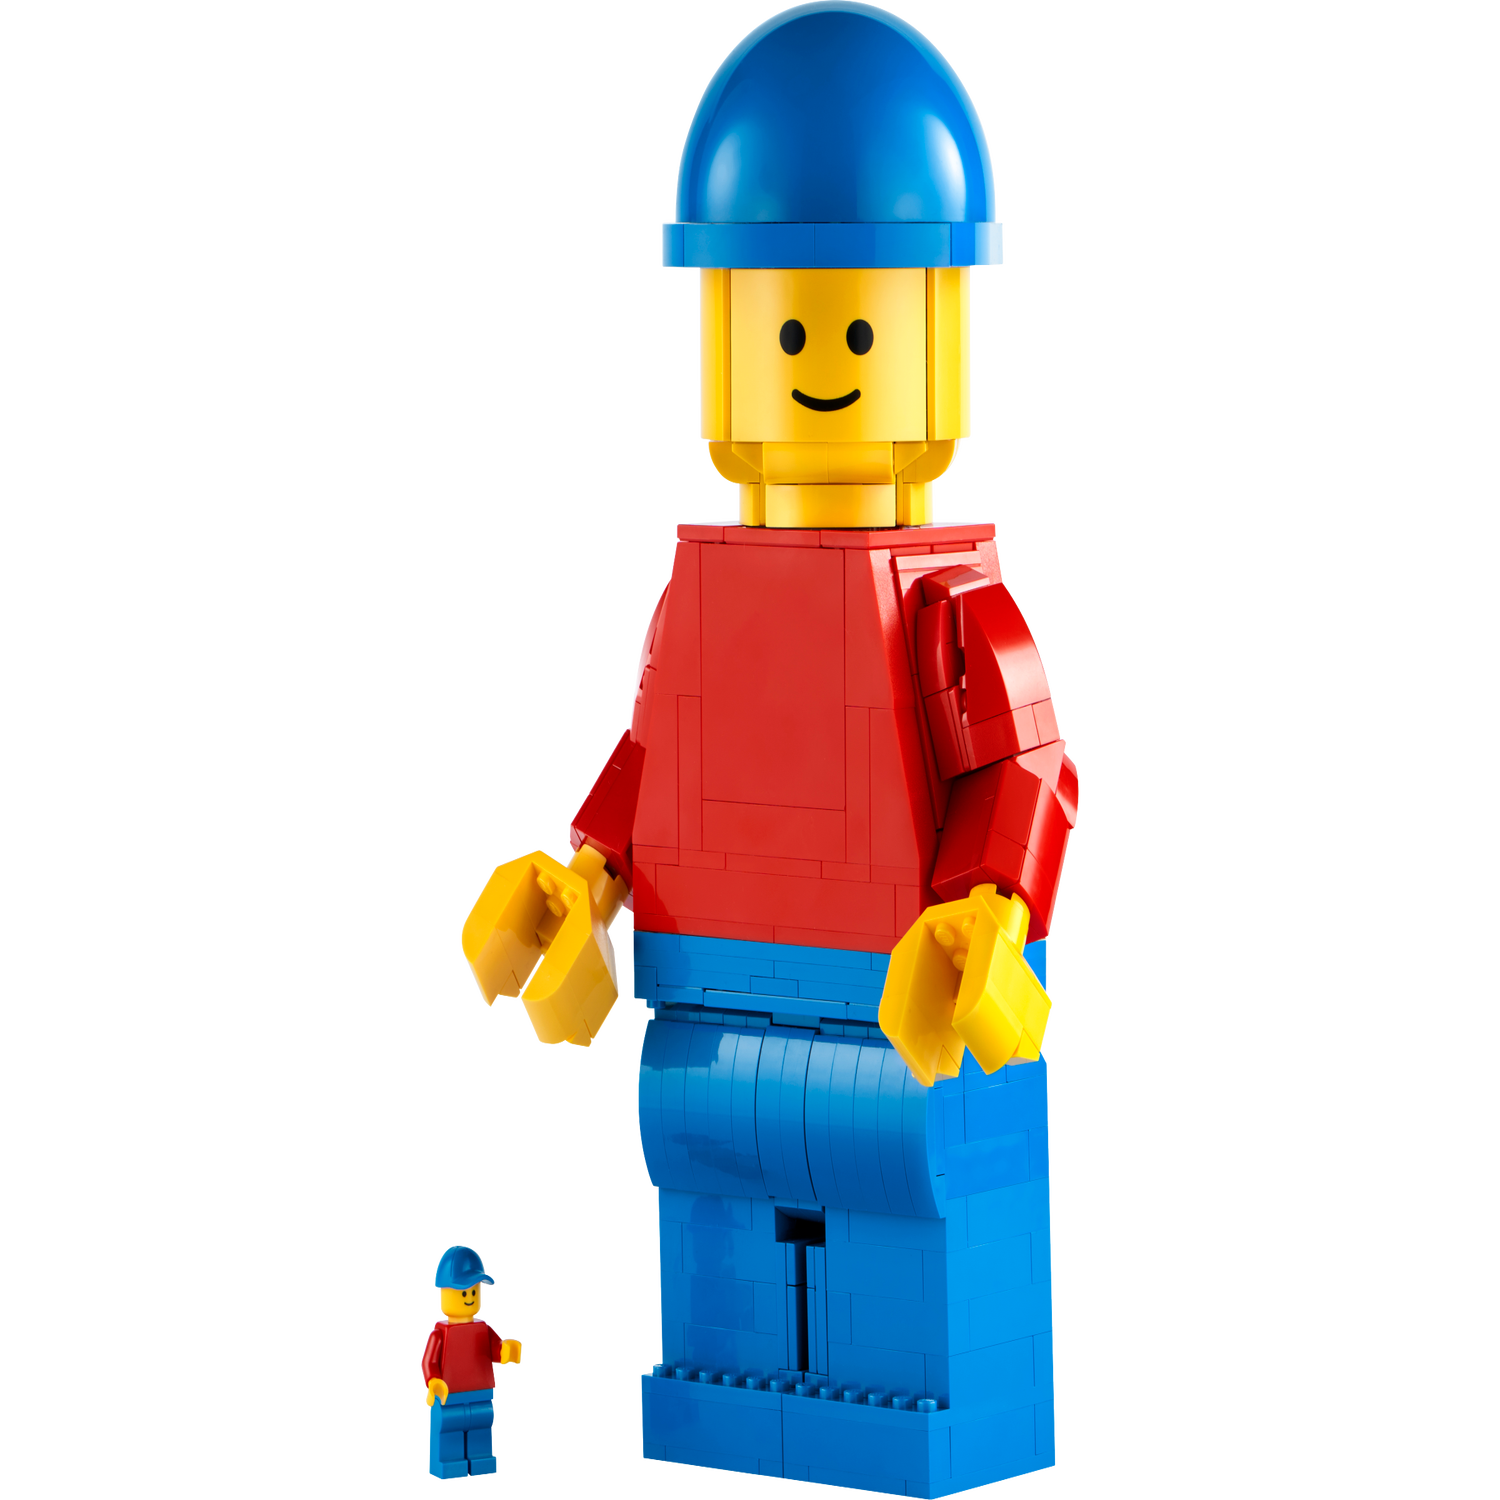 Up-Scaled LEGO® Minifigure 40649 | Minifigures | Buy online at the ...